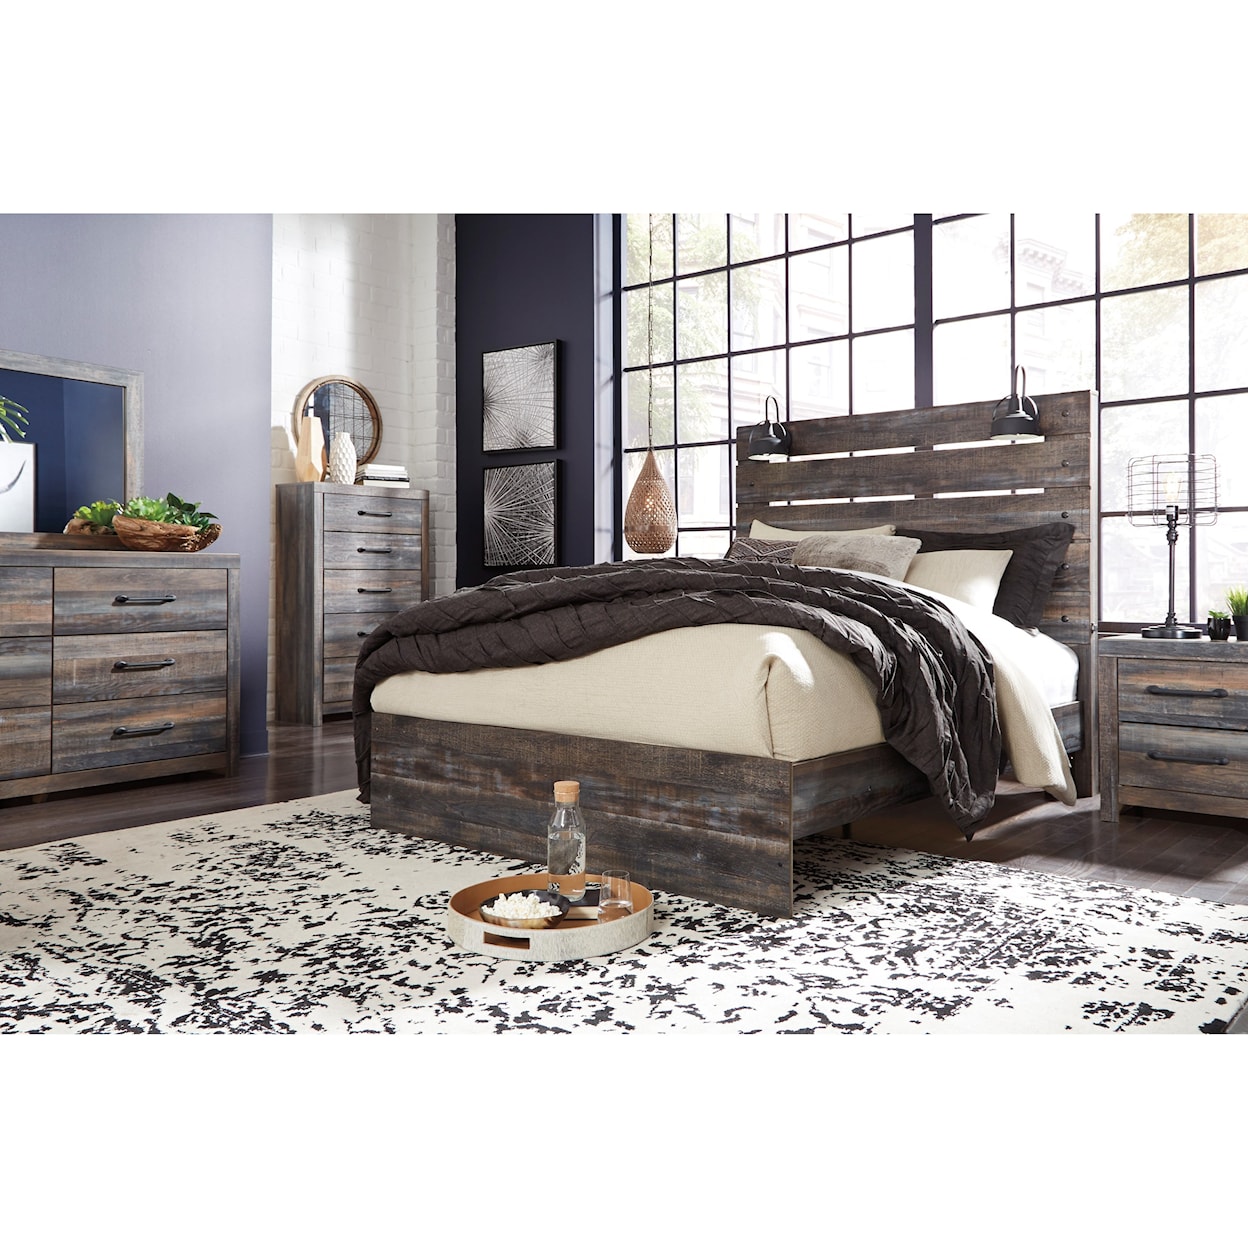 Signature Design by Ashley Furniture Drystan King Bedroom Group